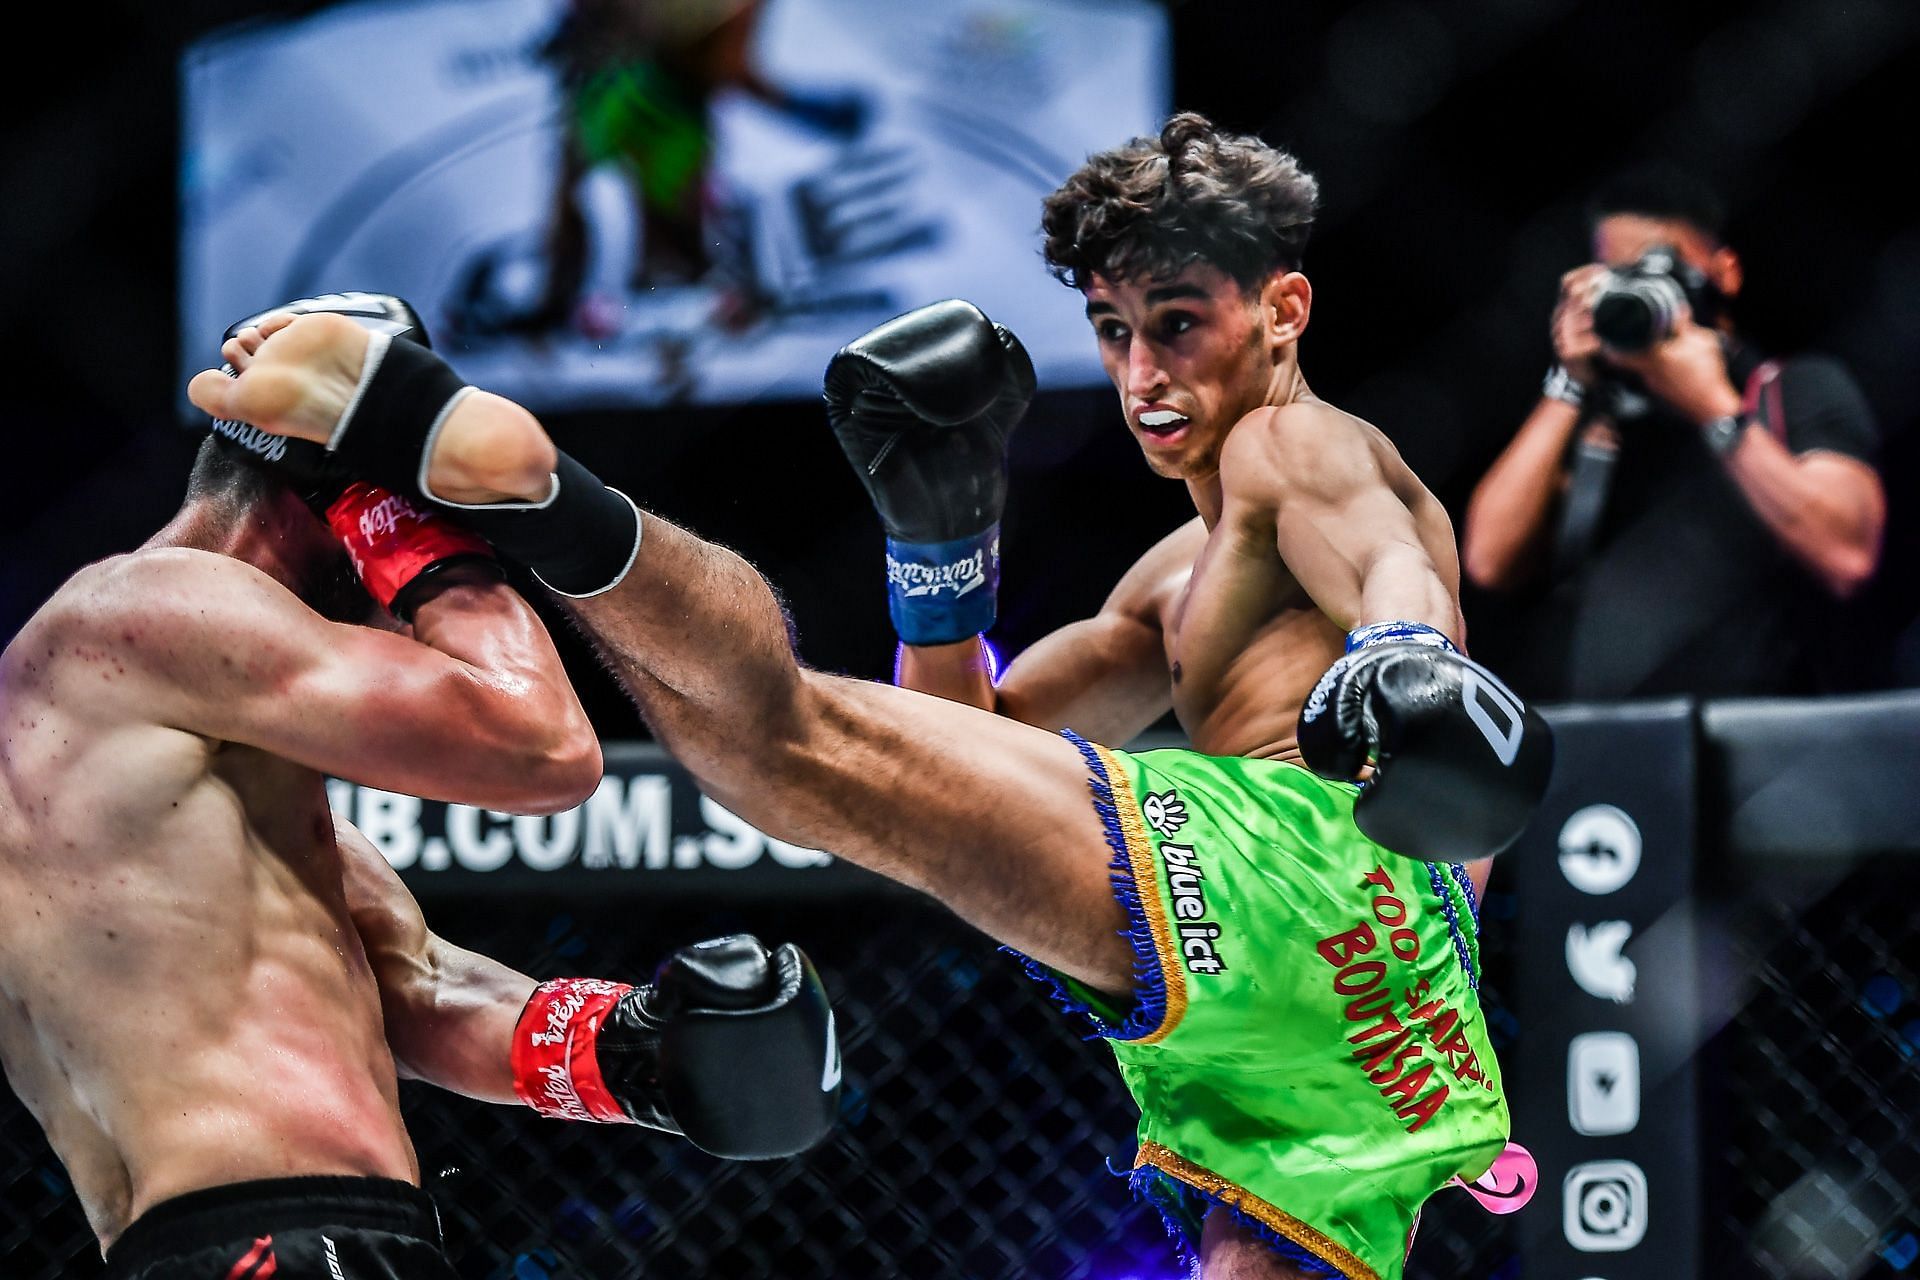 Mohammed Boutasaa [Photo Credit: ONE Championship]